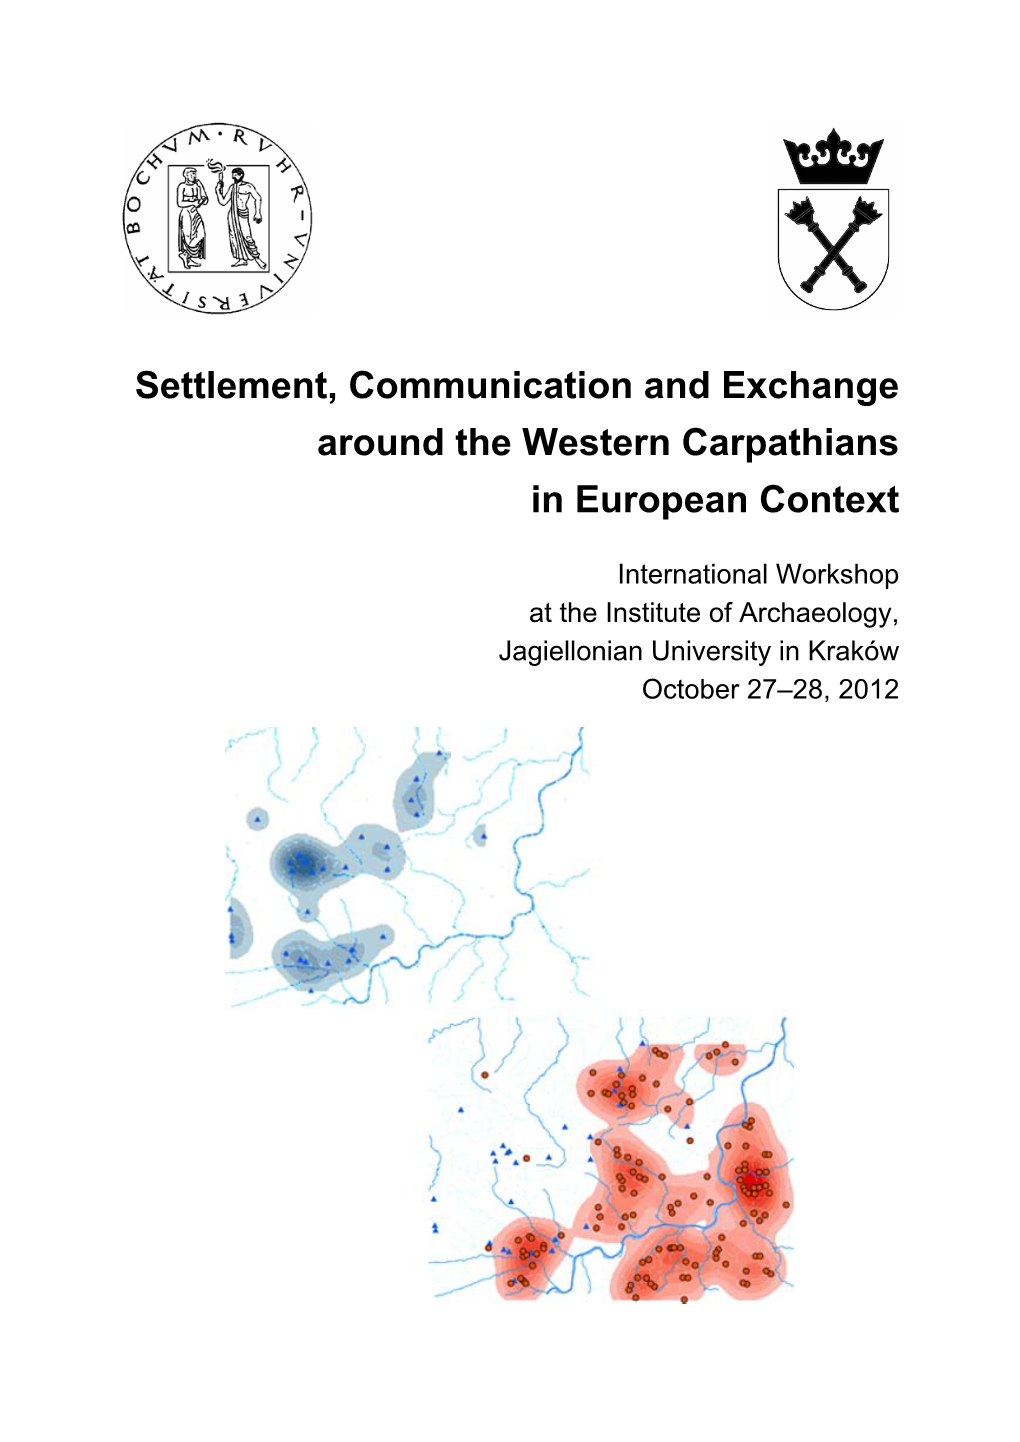 Settlement, Communication and Exchange Around the Western Carpathians in European Context